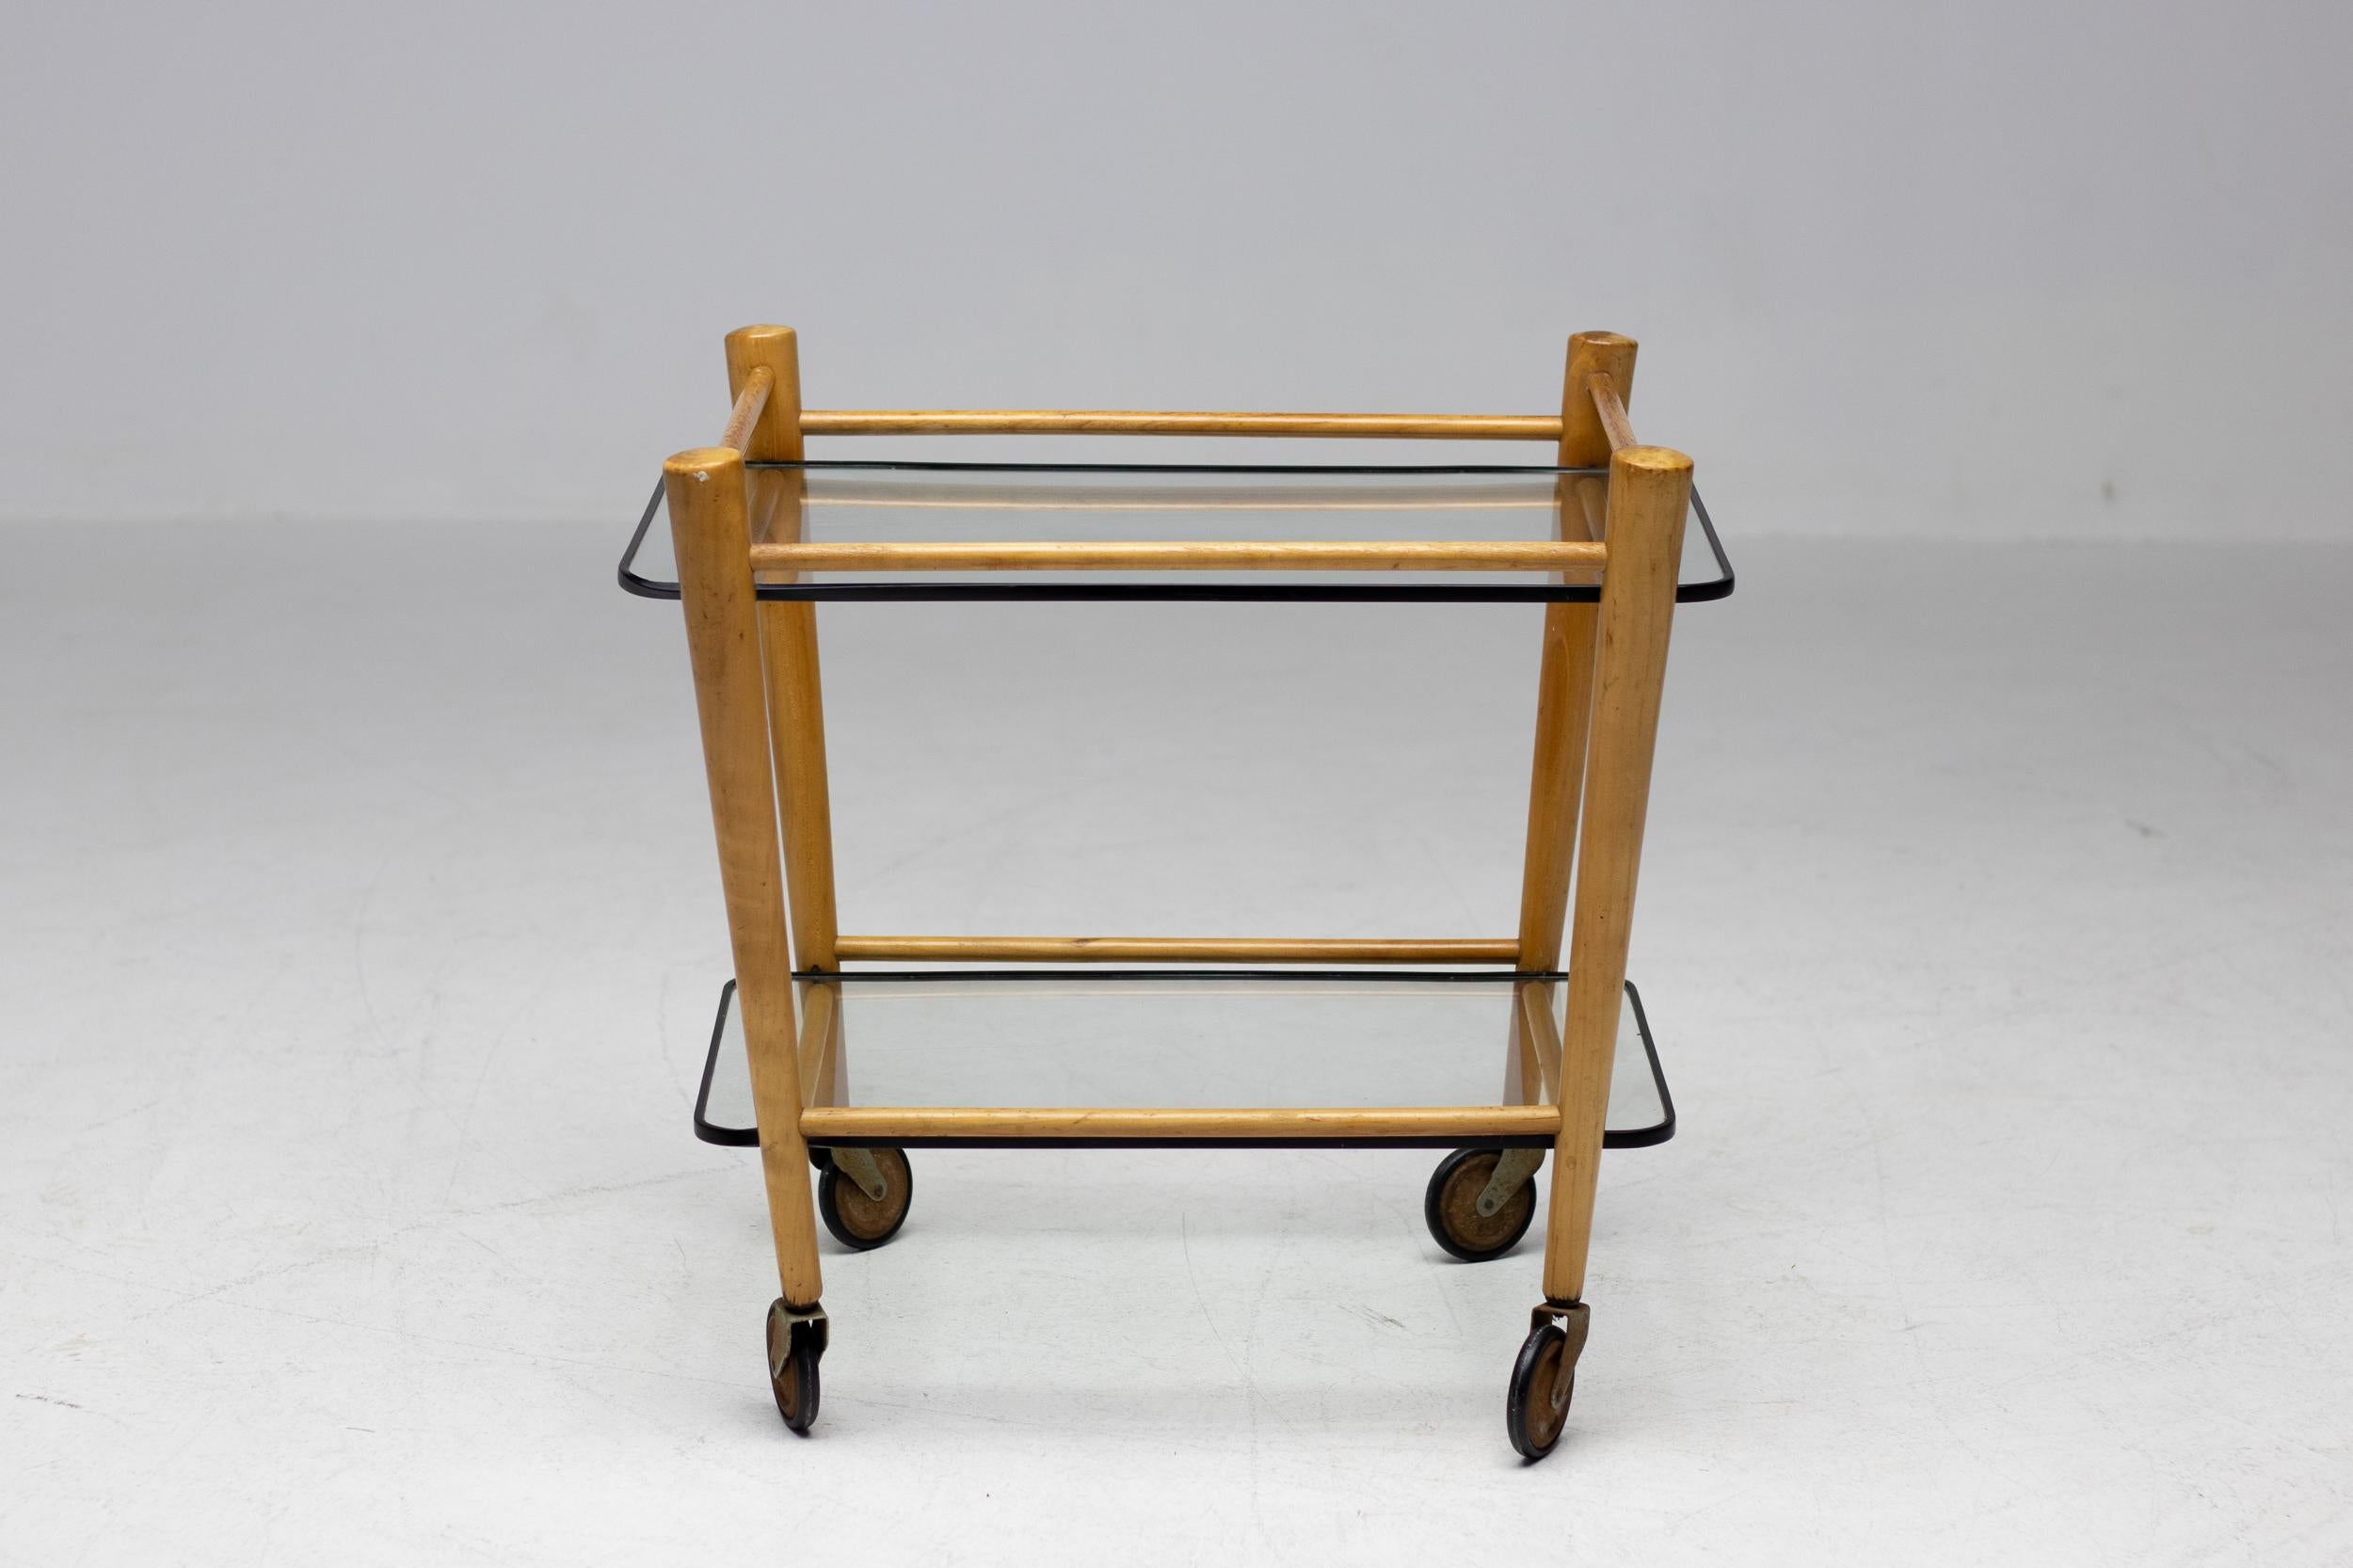 Wonderful little tea cart made in Italy, circa 1950.
The piece is still in all original condition.